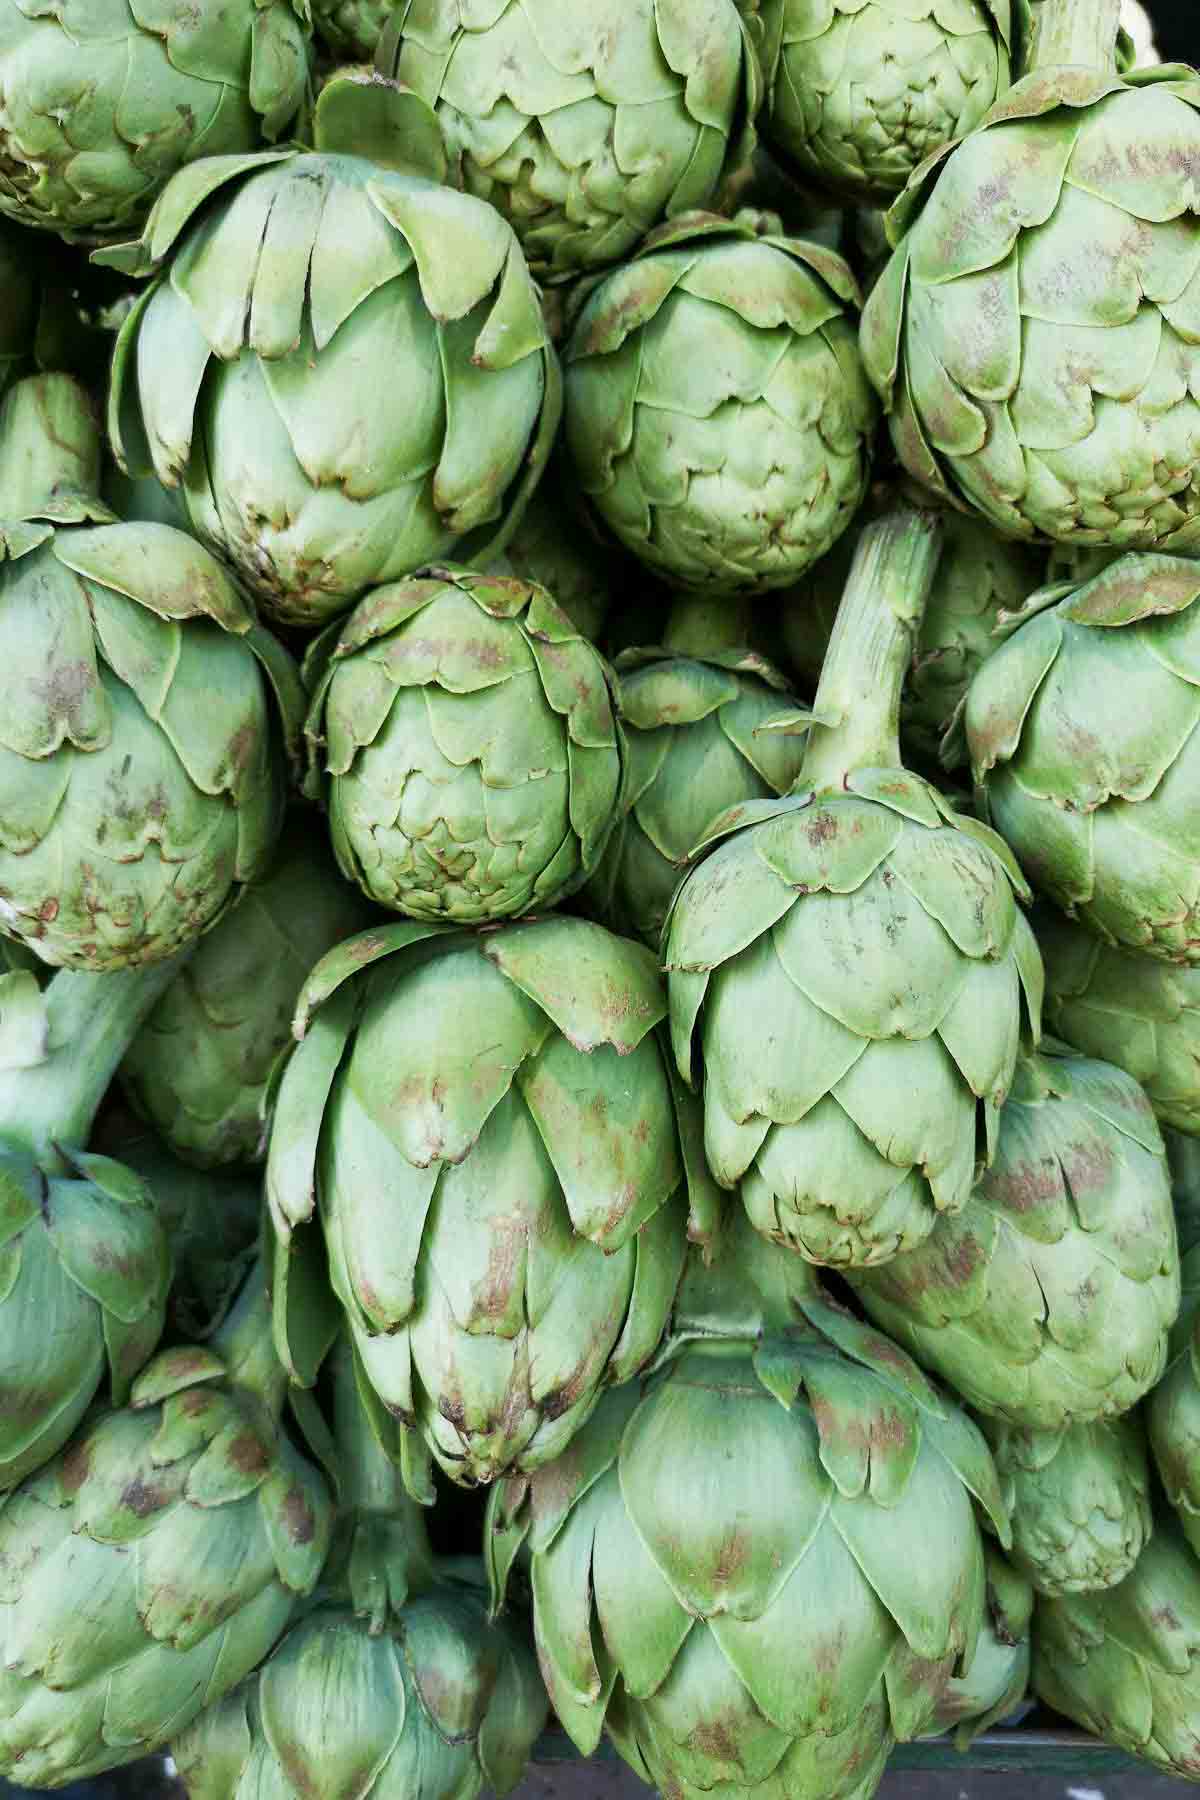 A pile of fresh artichokes on display.